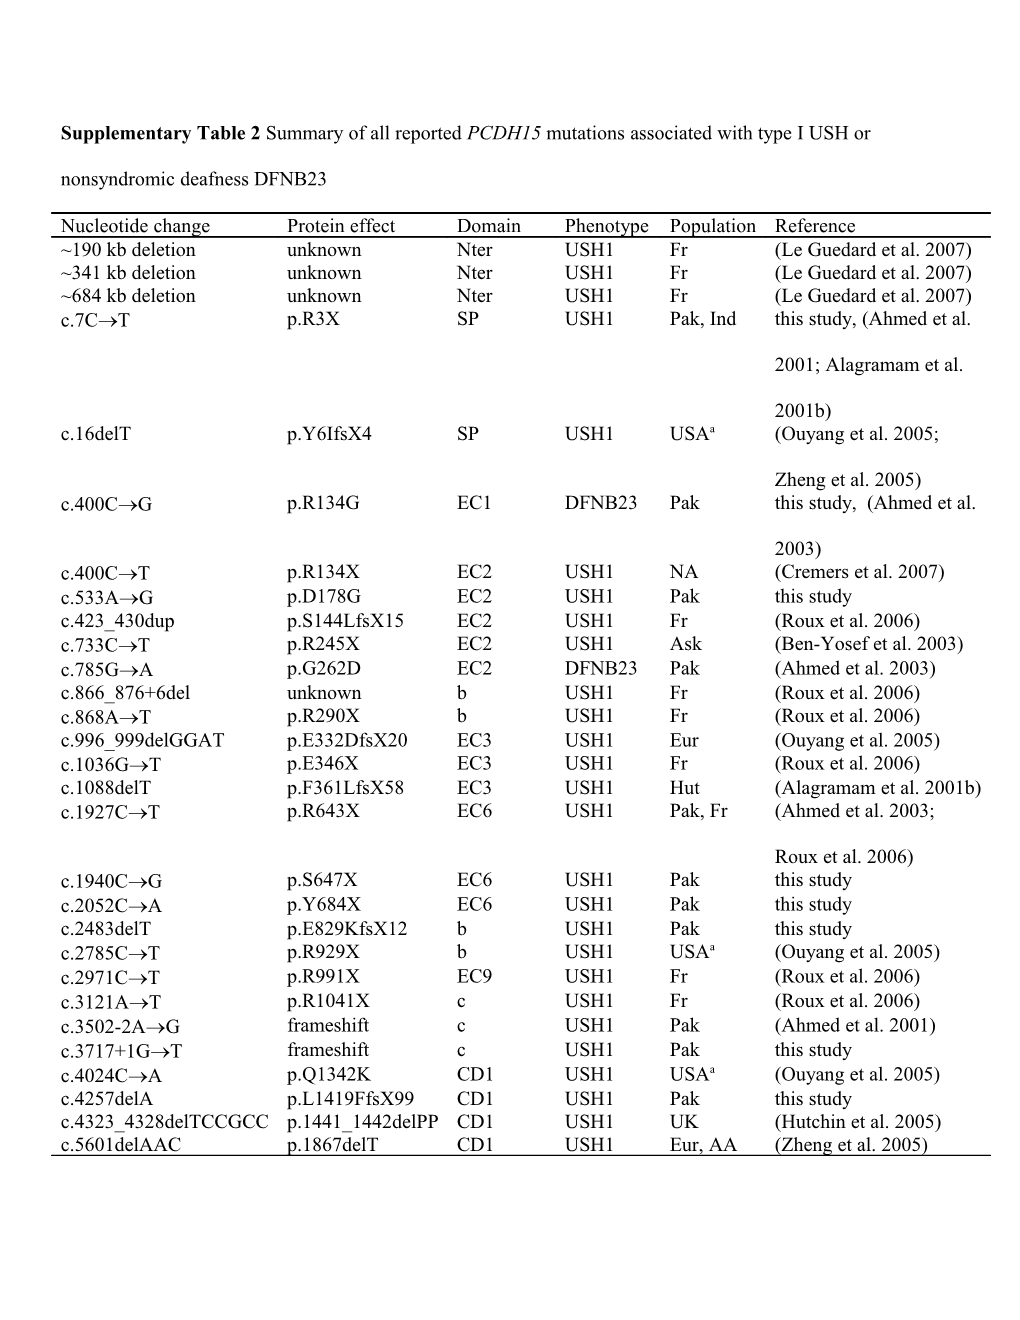 Table 3 Summary of All Reported PCDH15 Mutations Associated with Type I USH Or Nonsyndromic